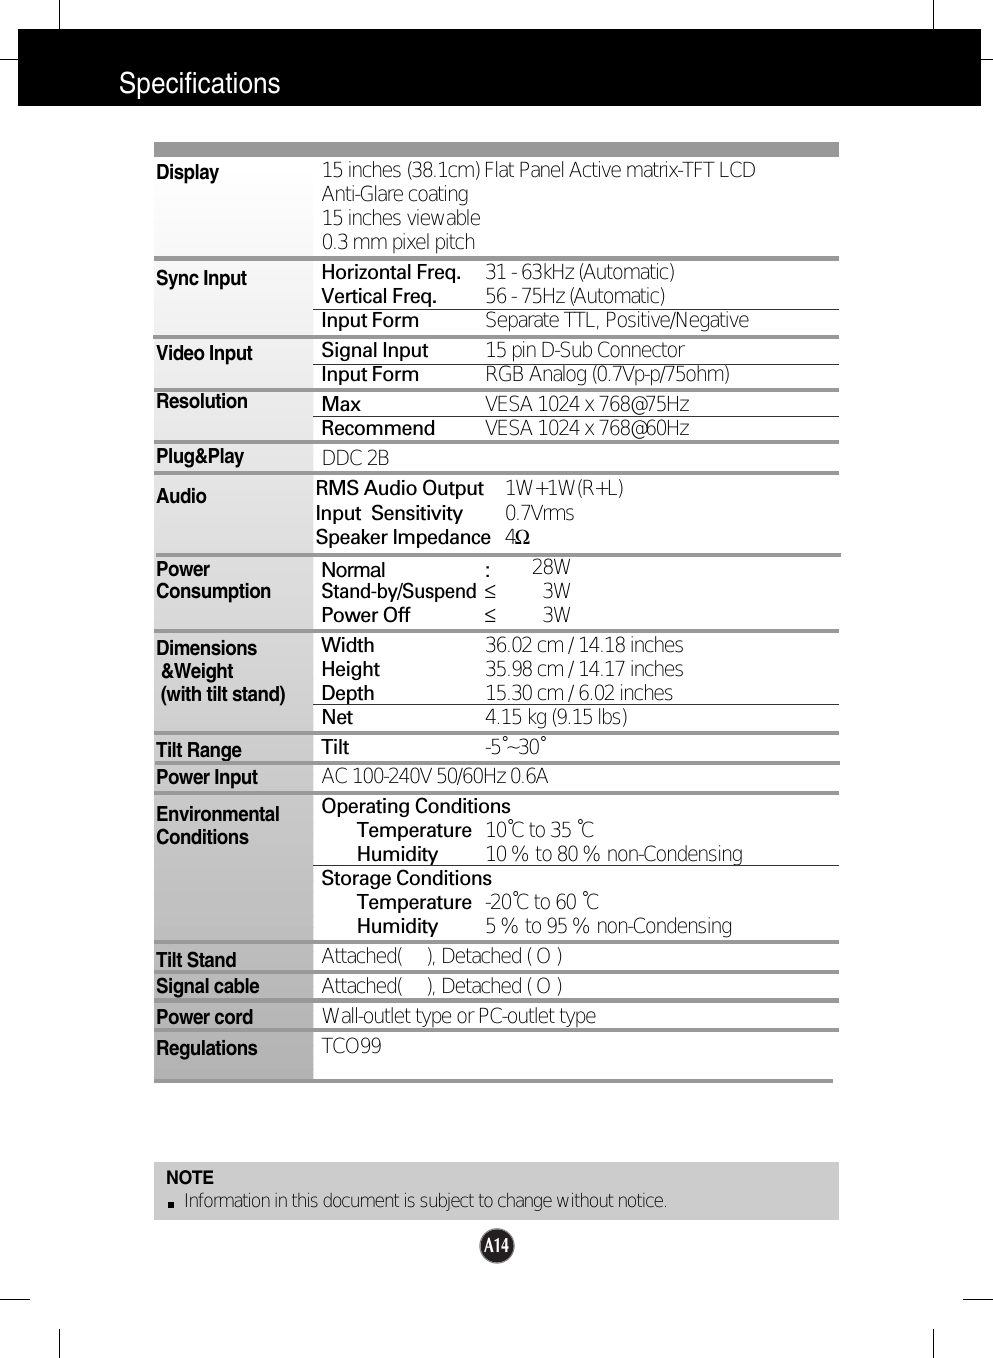 A14SpecificationsNOTEInformation in this document is subject to change without notice.15 inches (38.1cm) Flat Panel Active matrix-TFT LCD Anti-Glare coating15 inches viewable0.3 mm pixel pitchHorizontal Freq. 31 - 63kHz (Automatic)Vertical Freq. 56 - 75Hz (Automatic)Input Form Separate TTL, Positive/NegativeSignal Input 15 pin D-Sub ConnectorInput Form RGB Analog (0.7Vp-p/75ohm)Max VESA 1024 x 768@75Hz Recommend VESA 1024 x 768@60HzDDC 2BRMS Audio Output 1W+1W(R+L)Input  Sensitivity 0.7VrmsSpeaker Impedance 4ΩNormal :28WStand-by/Suspend≤3WPower Off ≤3WWidth 36.02 cm / 14.18 inchesHeight 35.98 cm / 14.17 inchesDepth 15.30 cm / 6.02 inchesNet 4.15 kg (9.15 lbs)Tilt -5˚~30˚AC 100-240V 50/60Hz 0.6AOperating ConditionsTemperature 10˚C to 35 ˚CHumidity 10 % to 80 % non-CondensingStorage ConditionsTemperature -20˚C to 60 ˚CHumidity 5 % to 95 % non-CondensingAttached(     ), Detached ( O )Attached(     ), Detached ( O )Wall-outlet type or PC-outlet typeTCO99DisplaySync InputVideo InputResolutionPlug&amp;PlayAudioPowerConsumptionDimensions&amp;Weight(with tilt stand)Tilt RangePower InputEnvironmentalConditionsTilt StandSignal cablePower cord Regulations